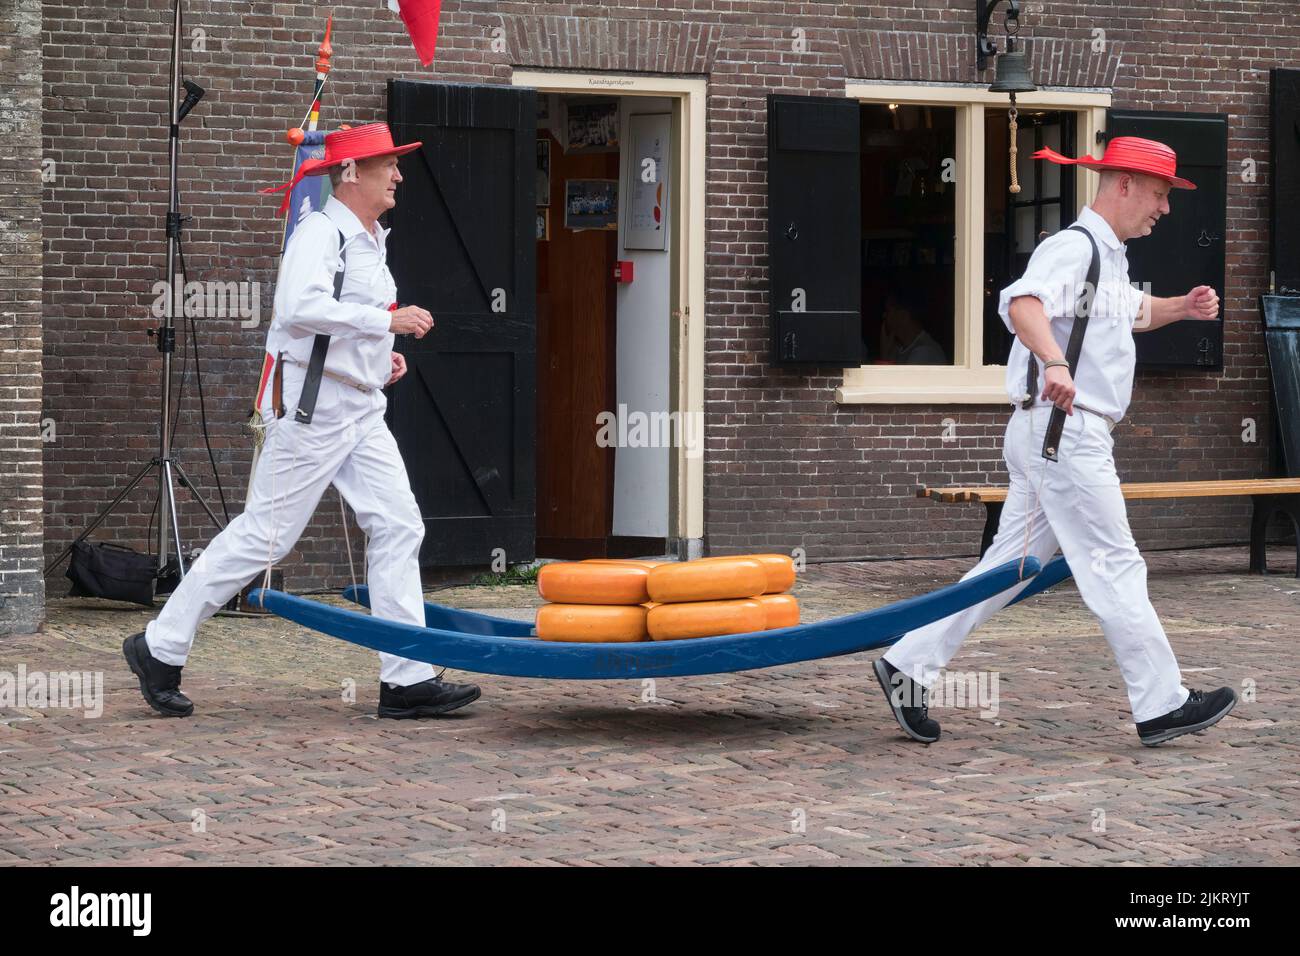 the traditional cheese martket in almaar in holland Stock Photo